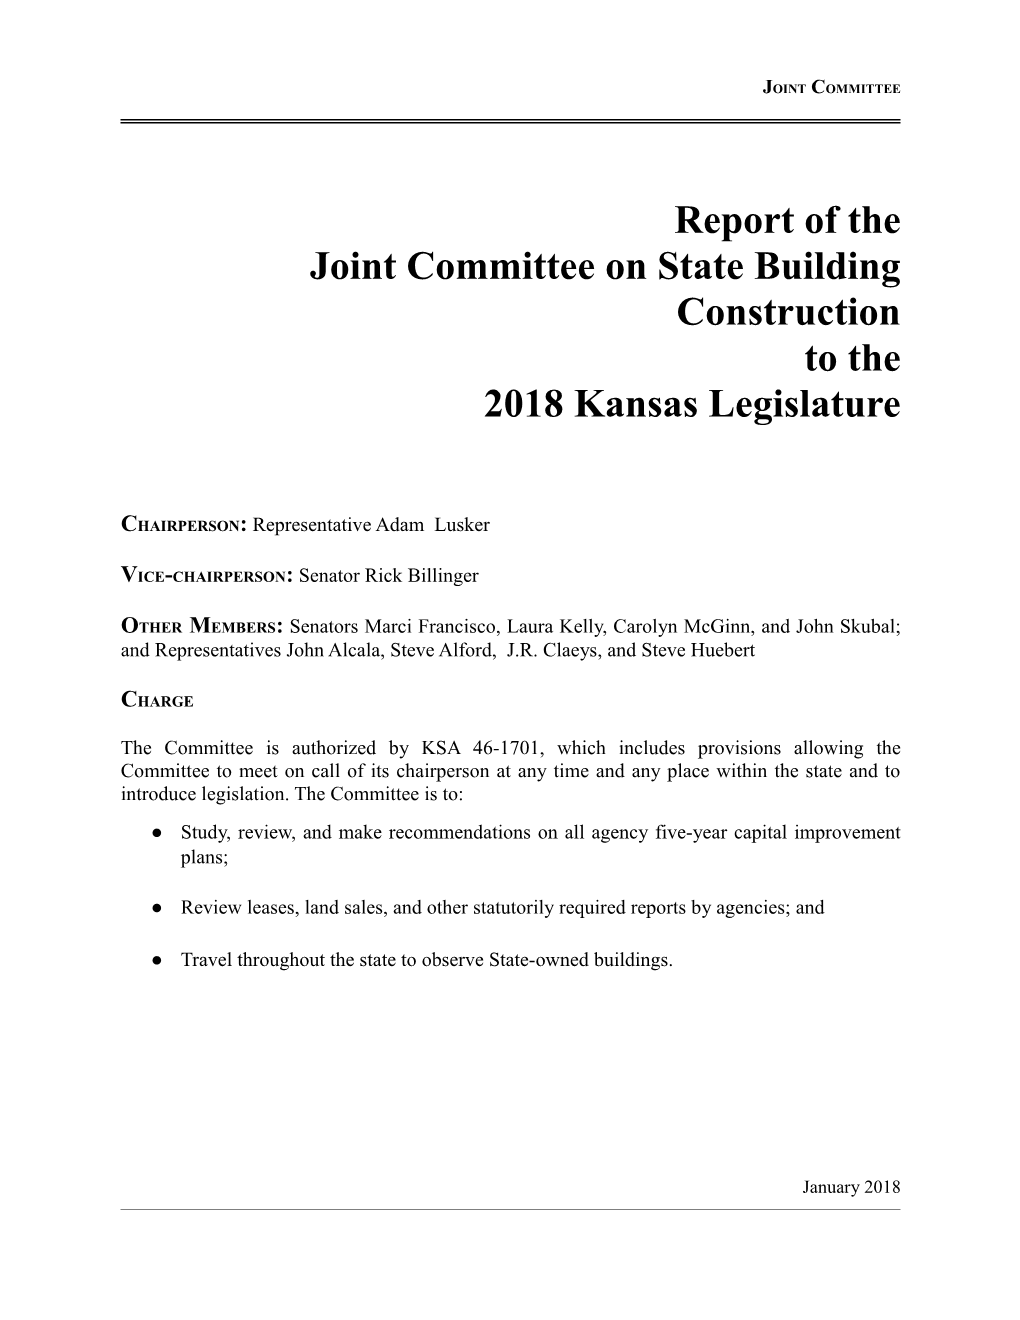 Report of the Joint Committee on State Building Construction to the 2018 Kansas Legislature